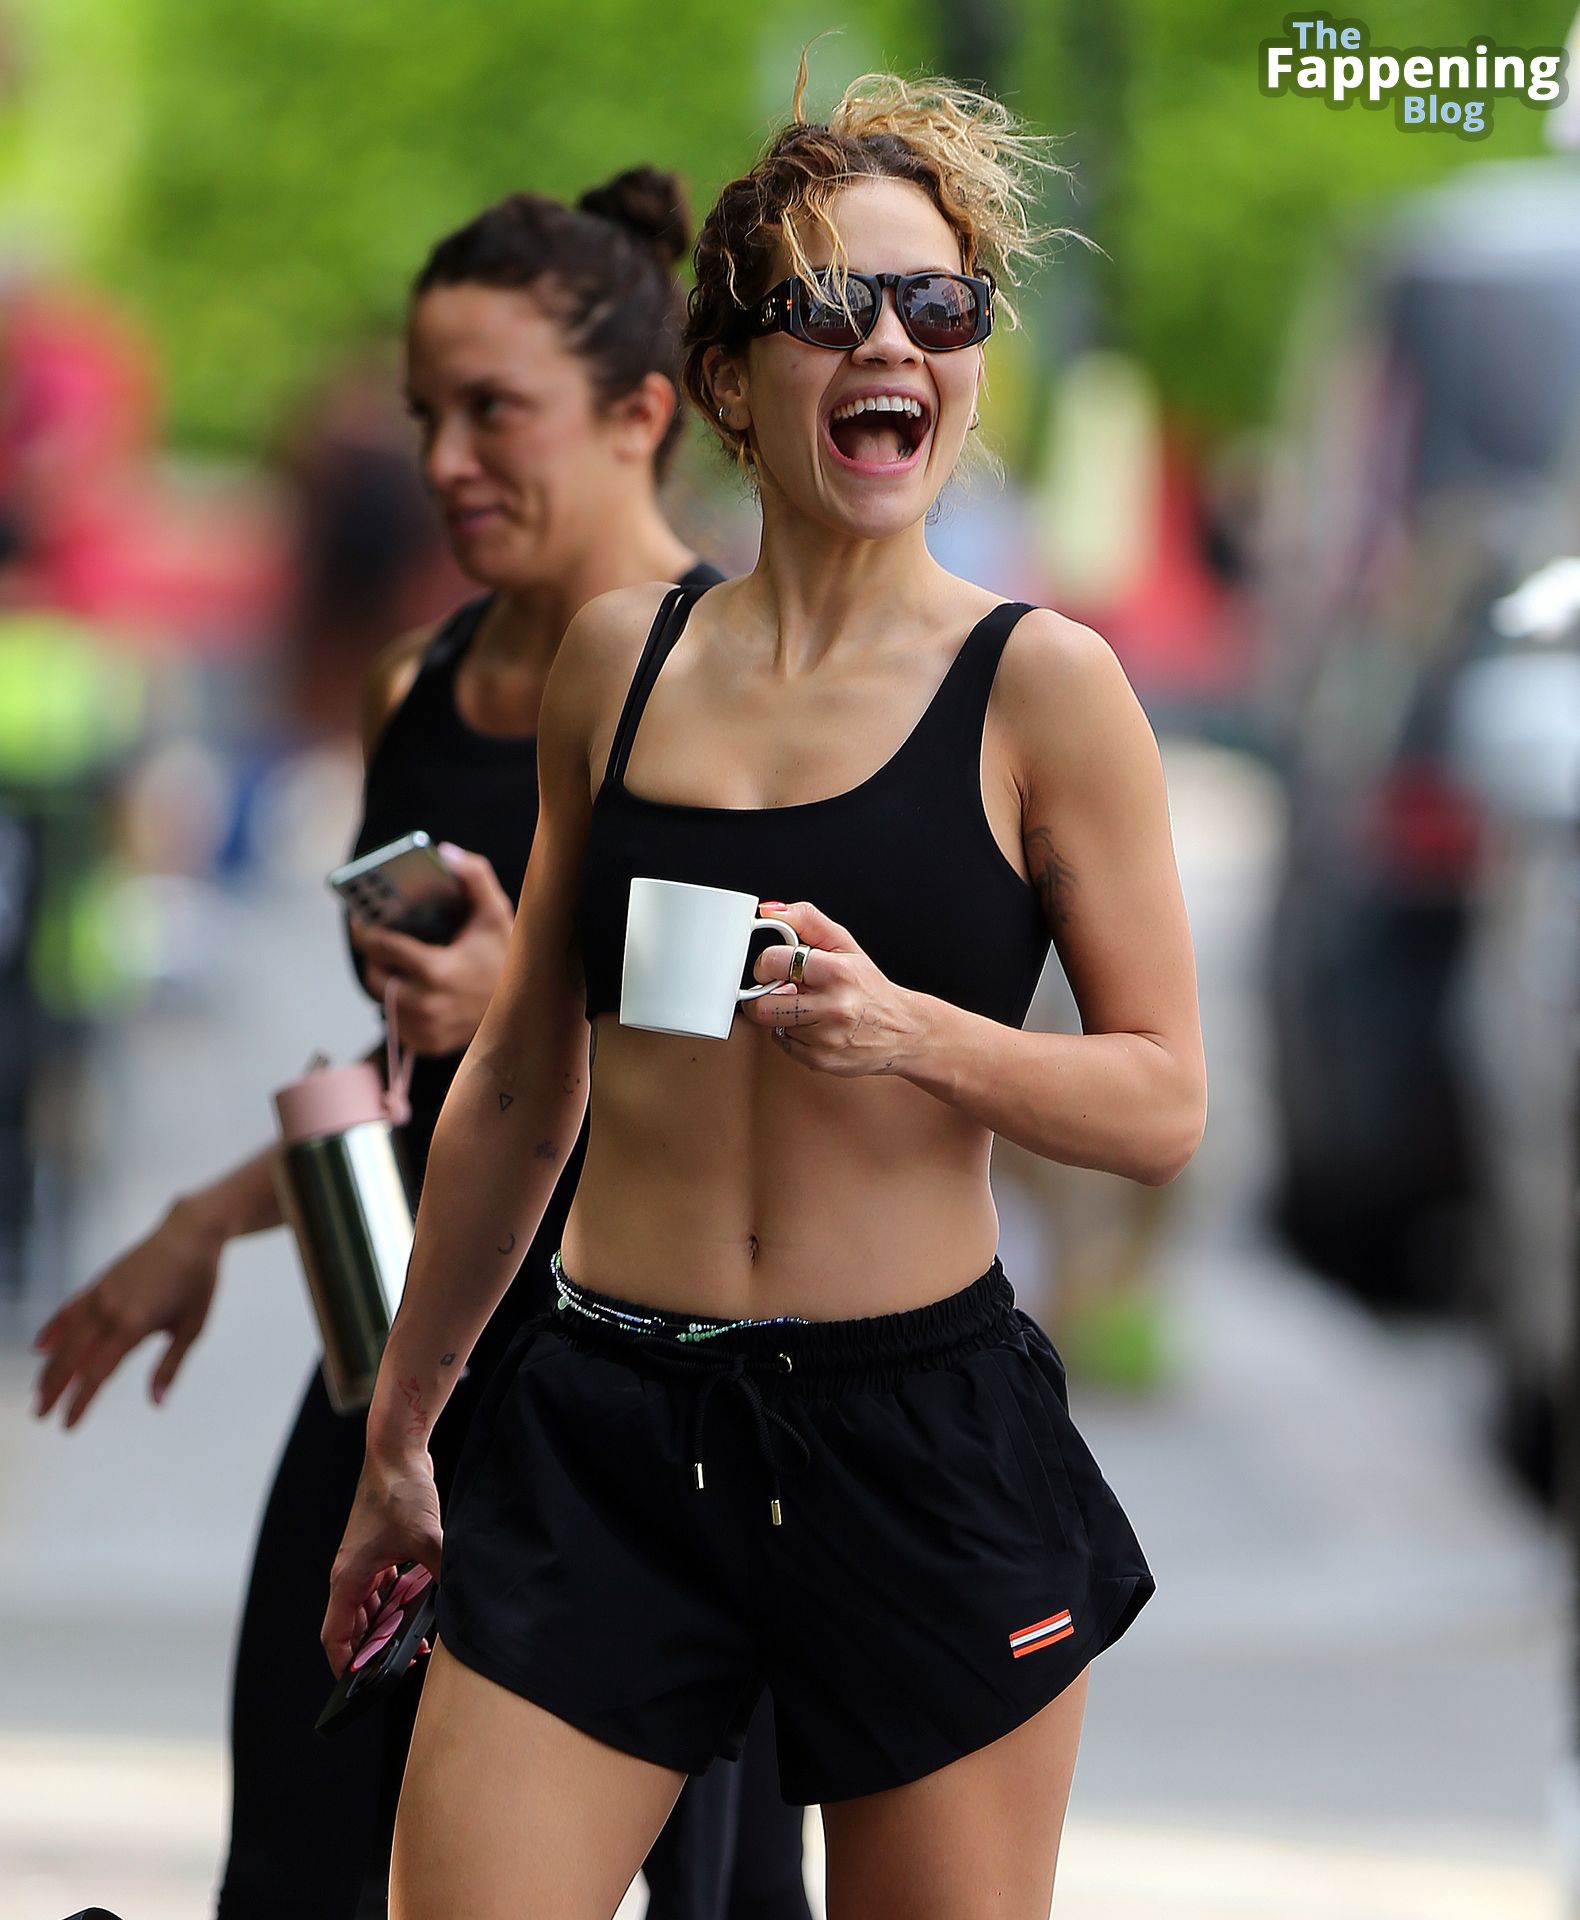 Rita Ora Looks Toned As She Leaves a London Gym Wearing a Sports Bra and Tiny Black Shorts (28 Photos)